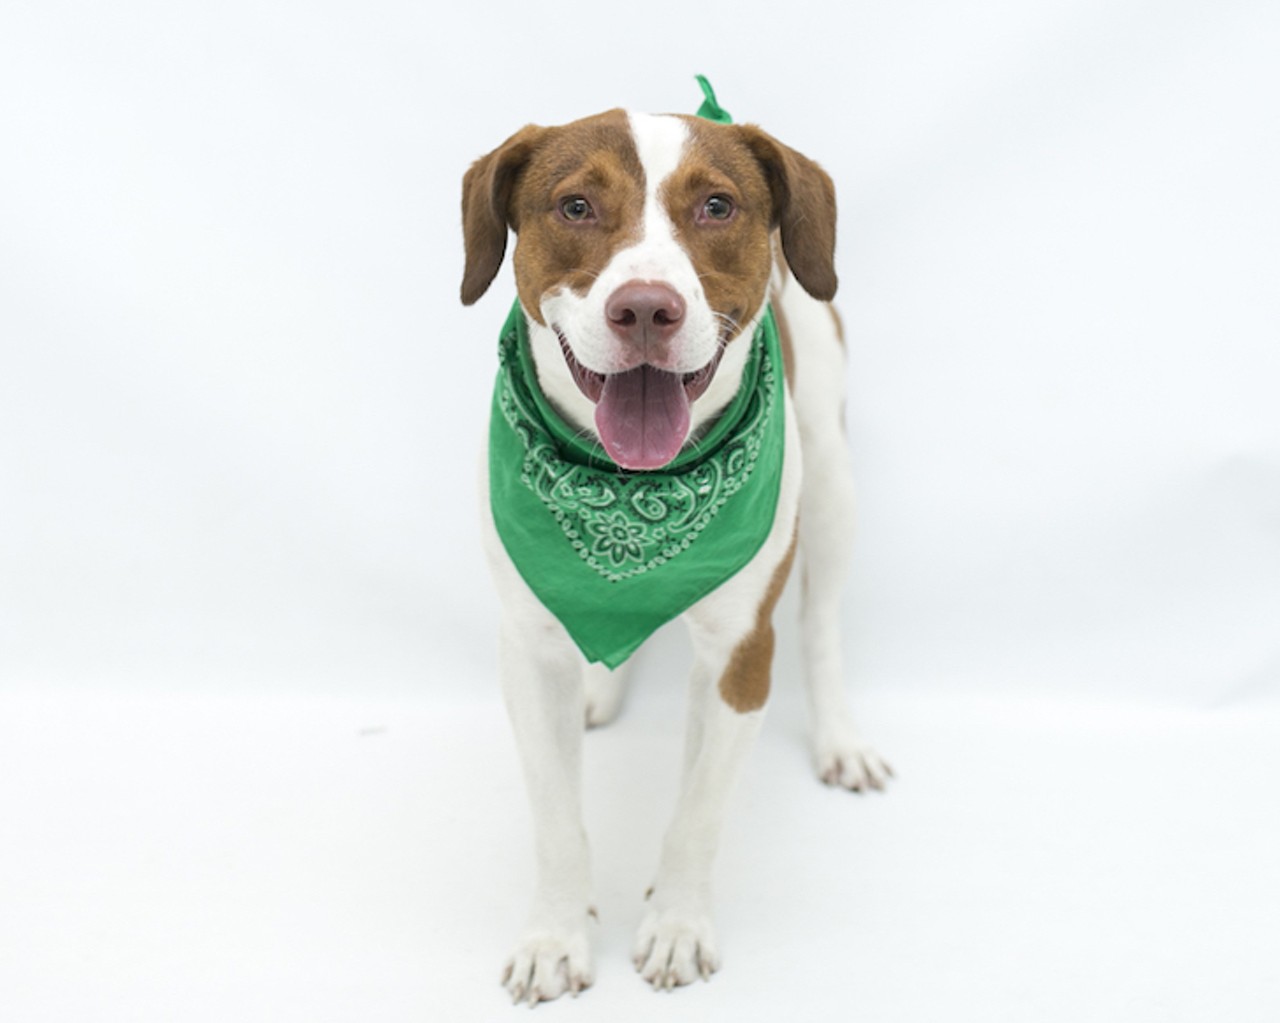 18 adoptable Orange County dogs ready for a serious commitment